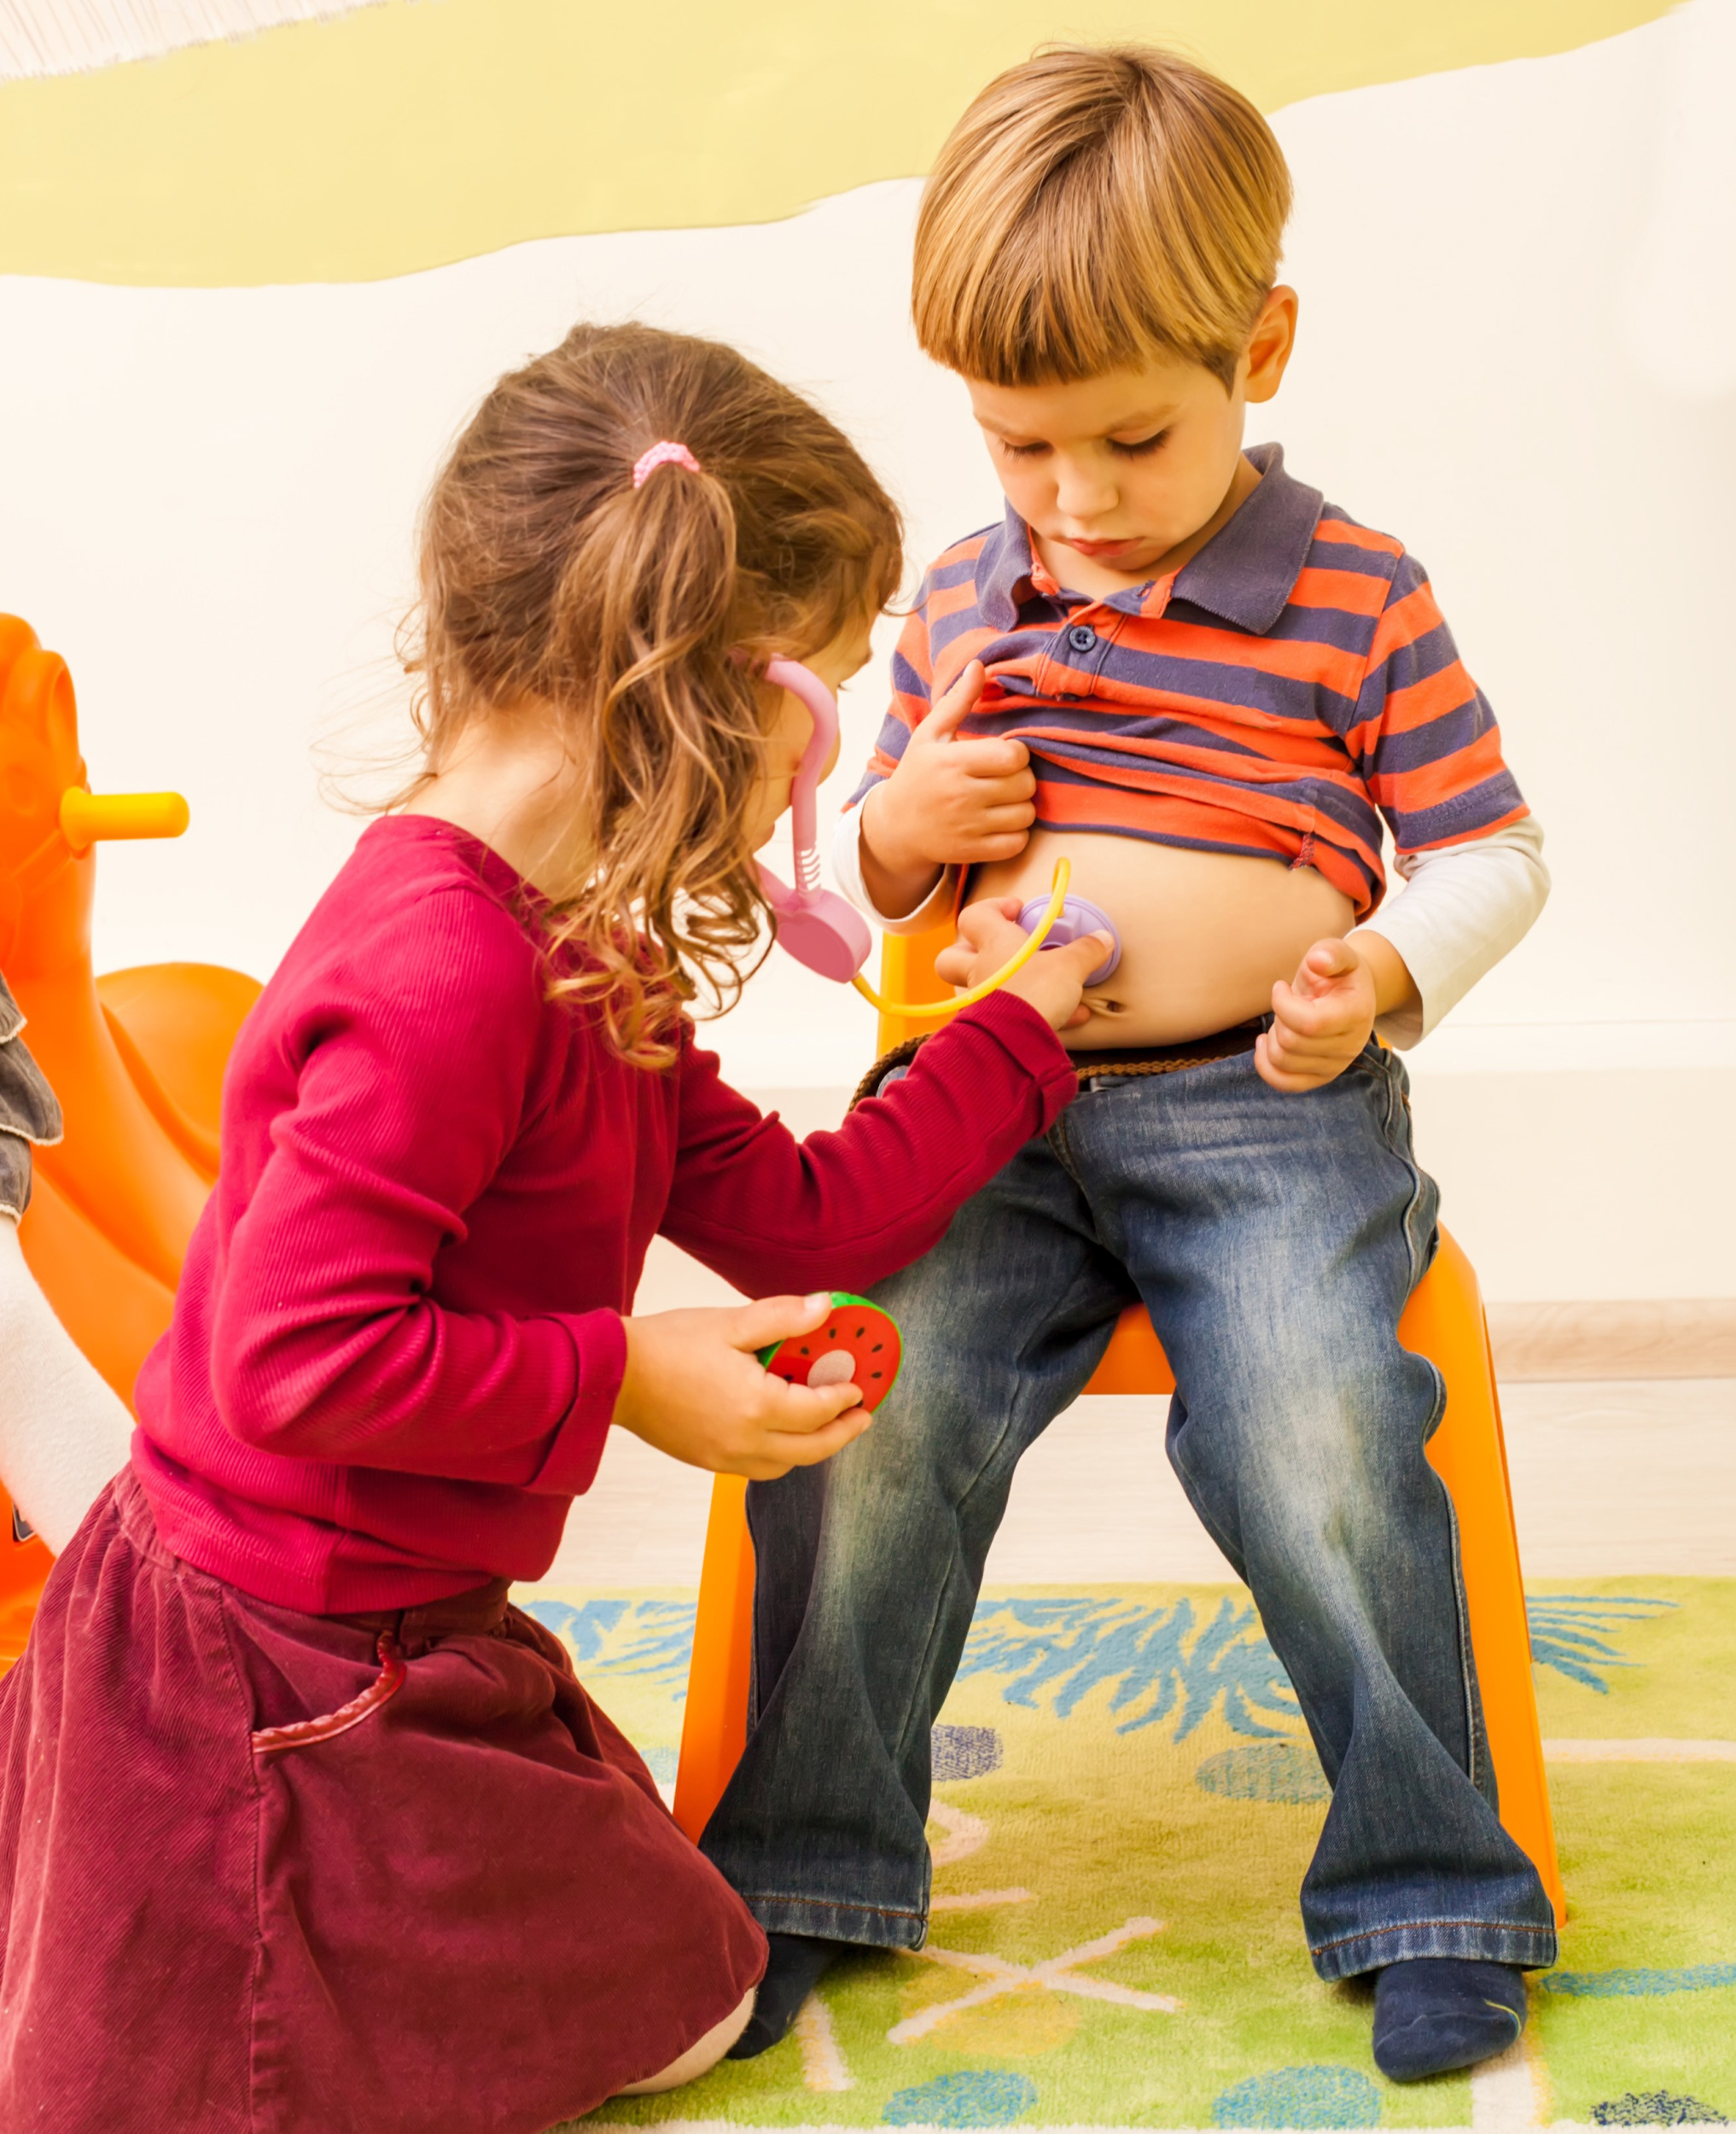 2 girl-with-stethoscope-is-playing-doctor-listening-boy-s-belly.jpg